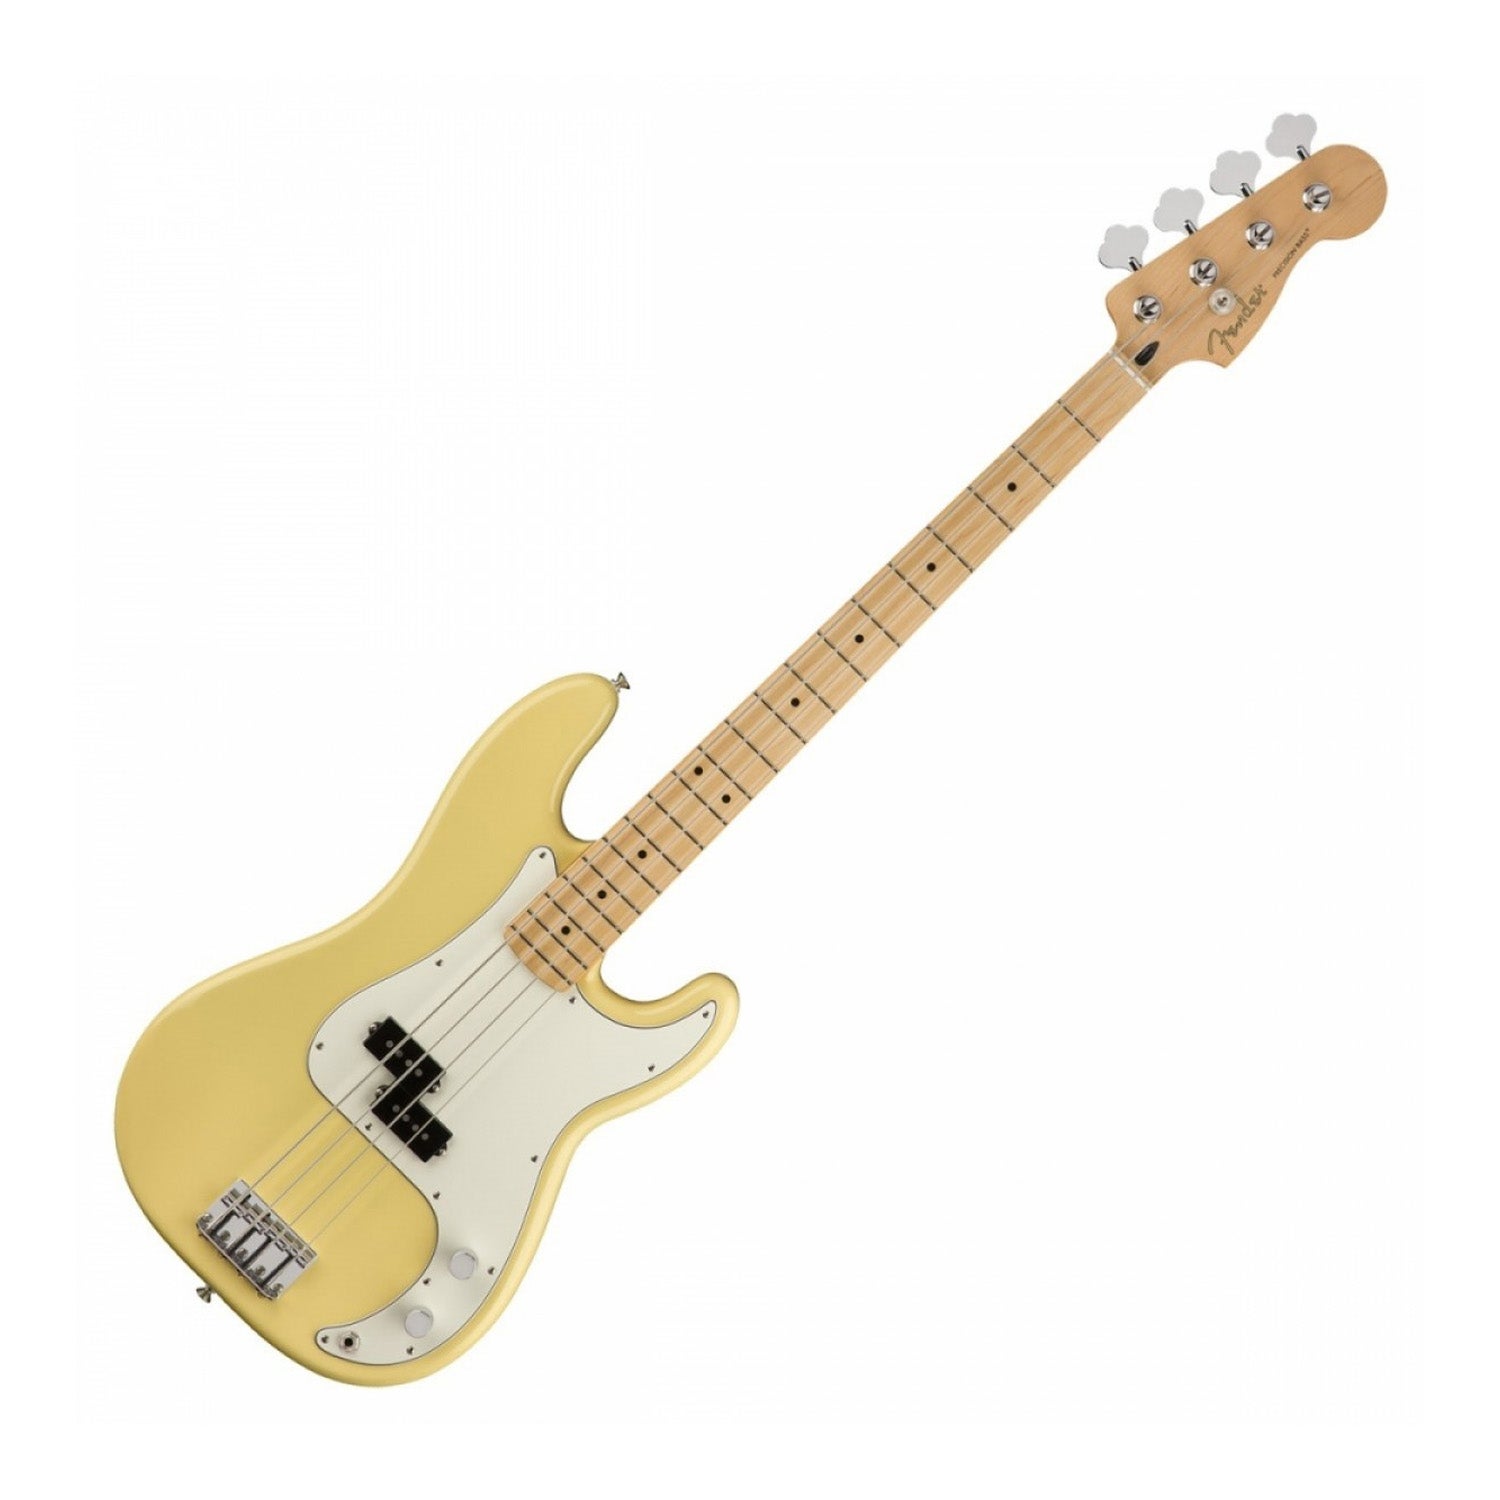 Fender Player Electric Precision Bass Guitar 0149802534, Maple 